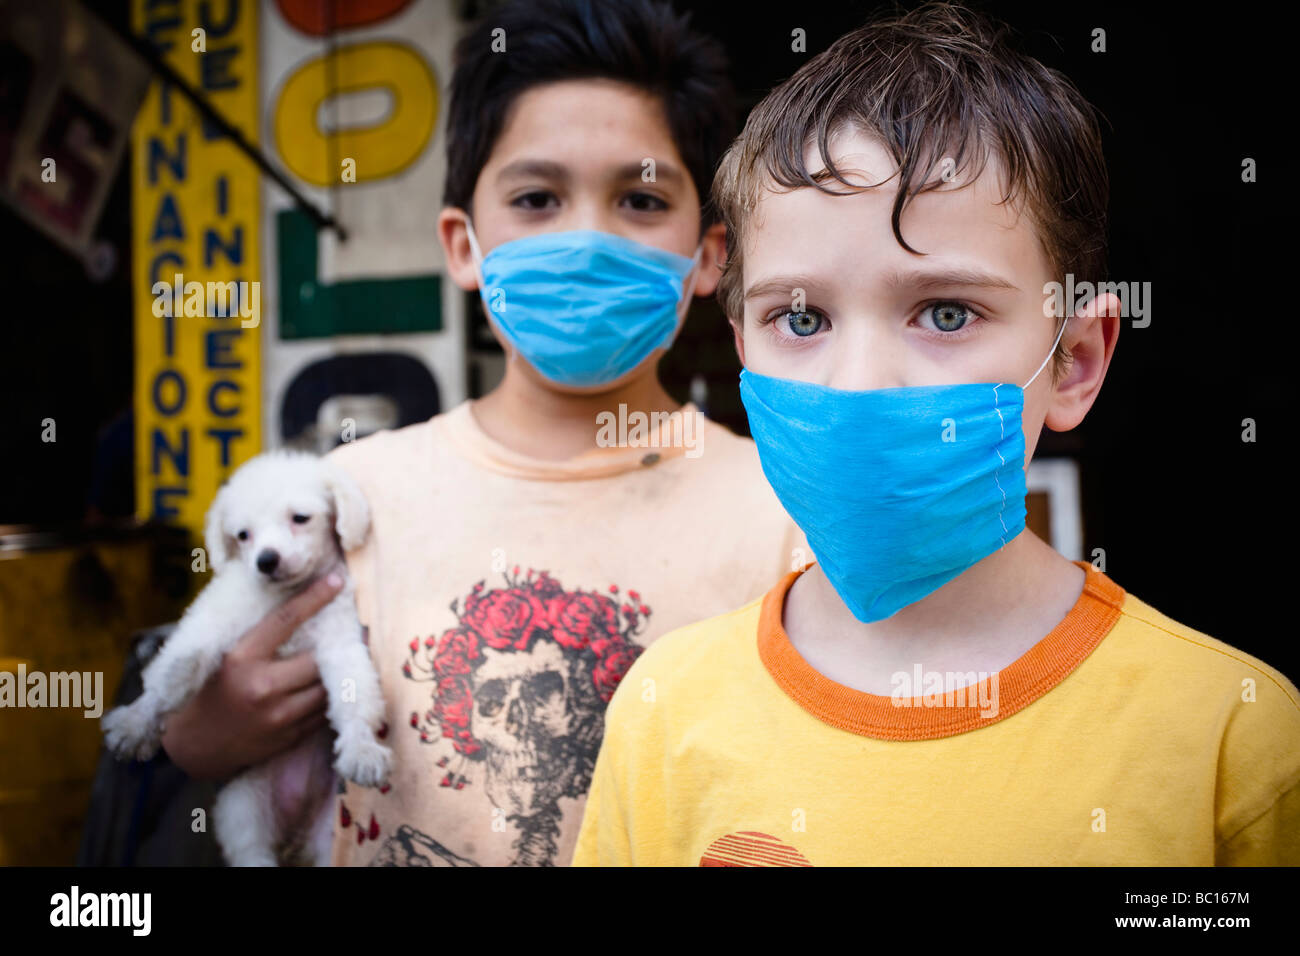 Portrait of two kids wearing masks holding a small puppy in the street during the swine flu epidemic in Mexico city, DF, Mexico. Stock Photo